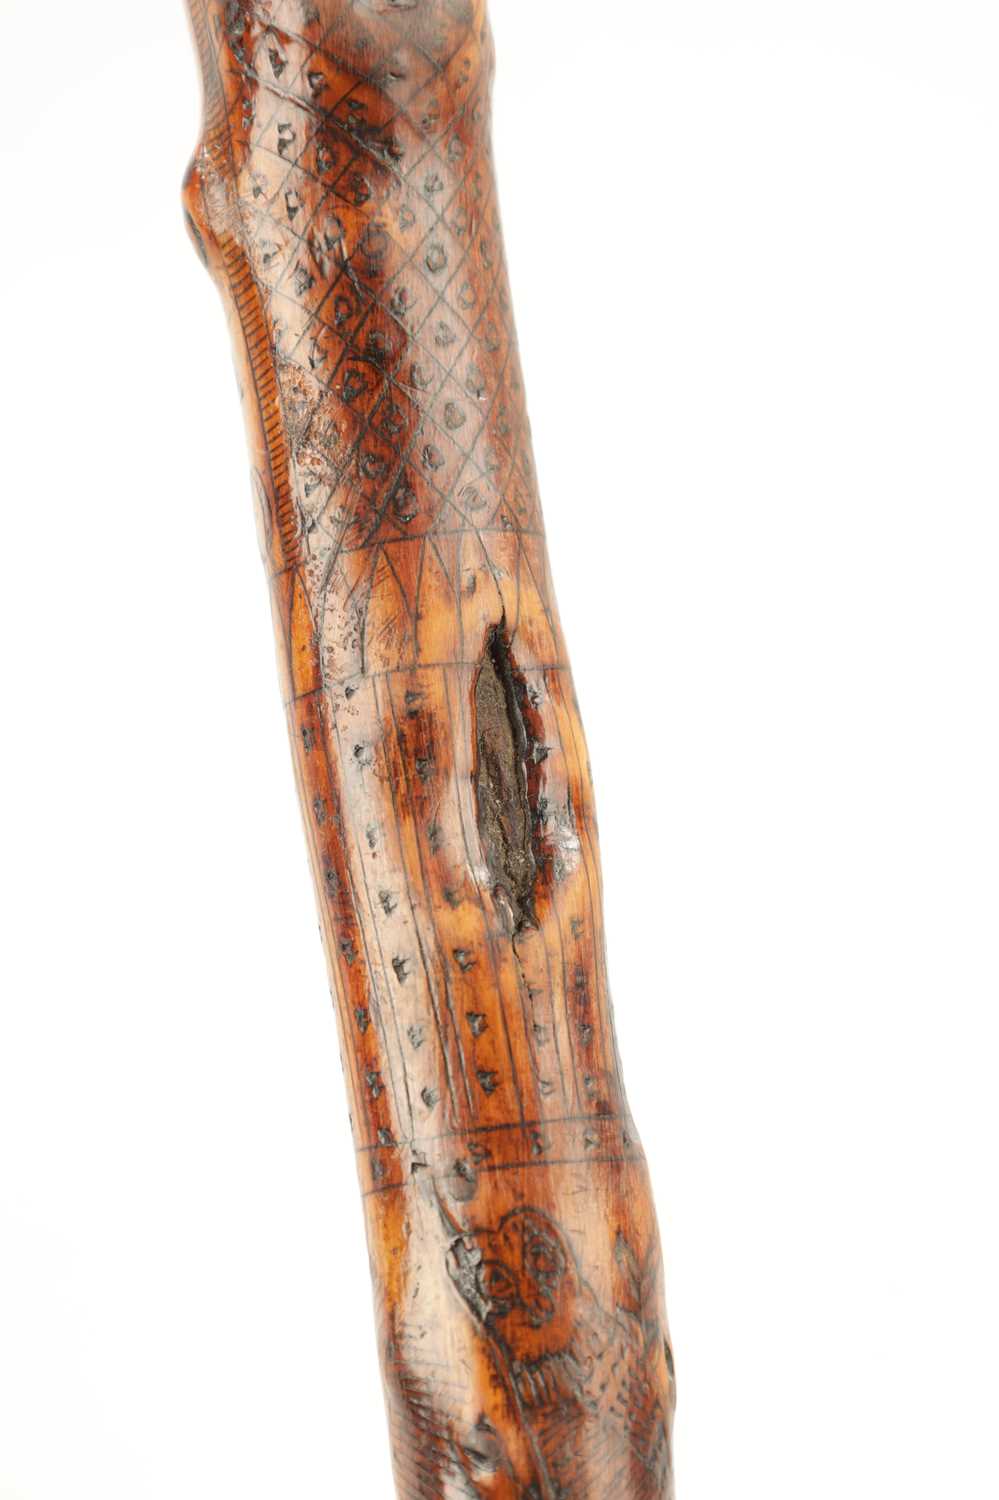 A RARE VICTORIAN FOLK ART CARVED HAWTHORN WALKING STICK DATED 1860 - Image 2 of 7